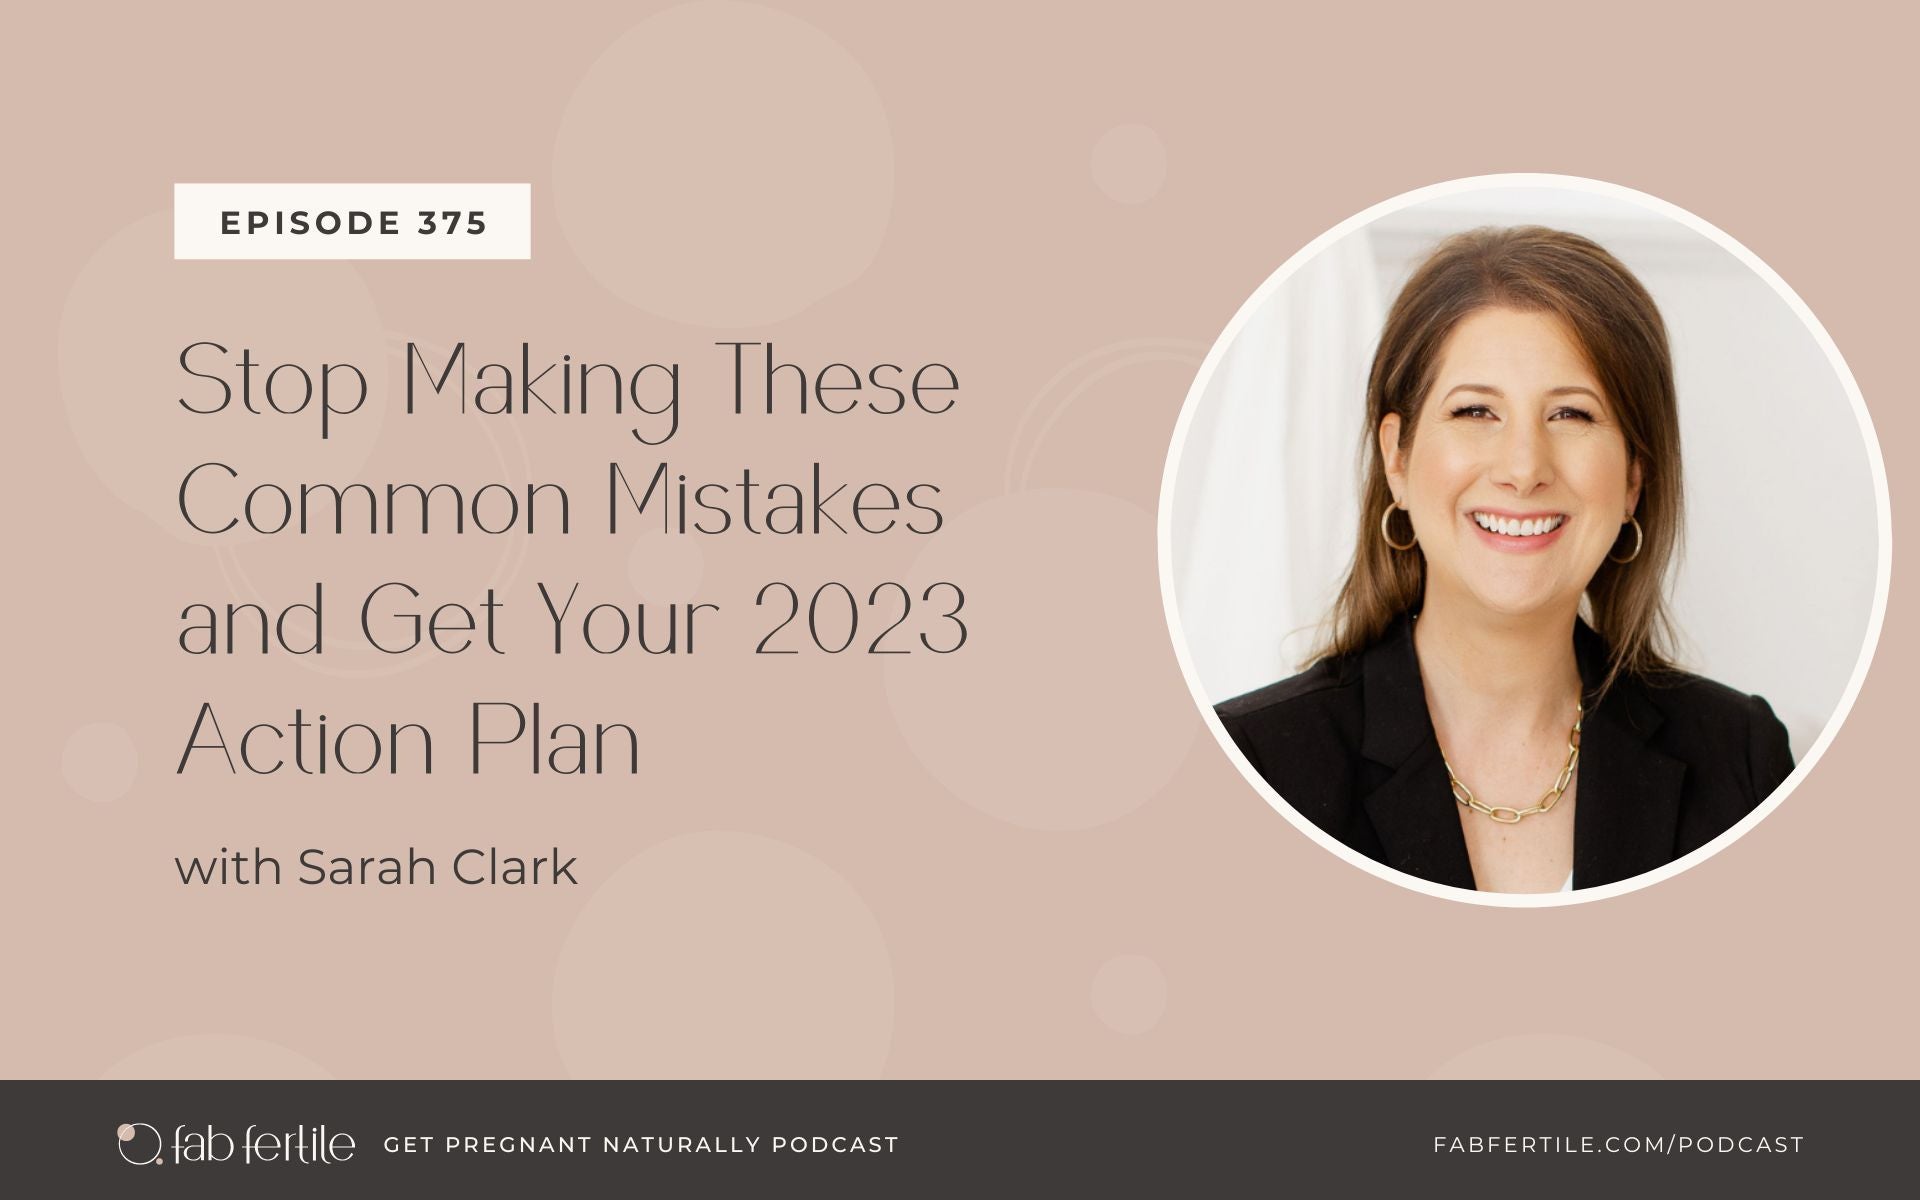 Stop Making These Common Mistakes and Get Your 2023 Action Plan